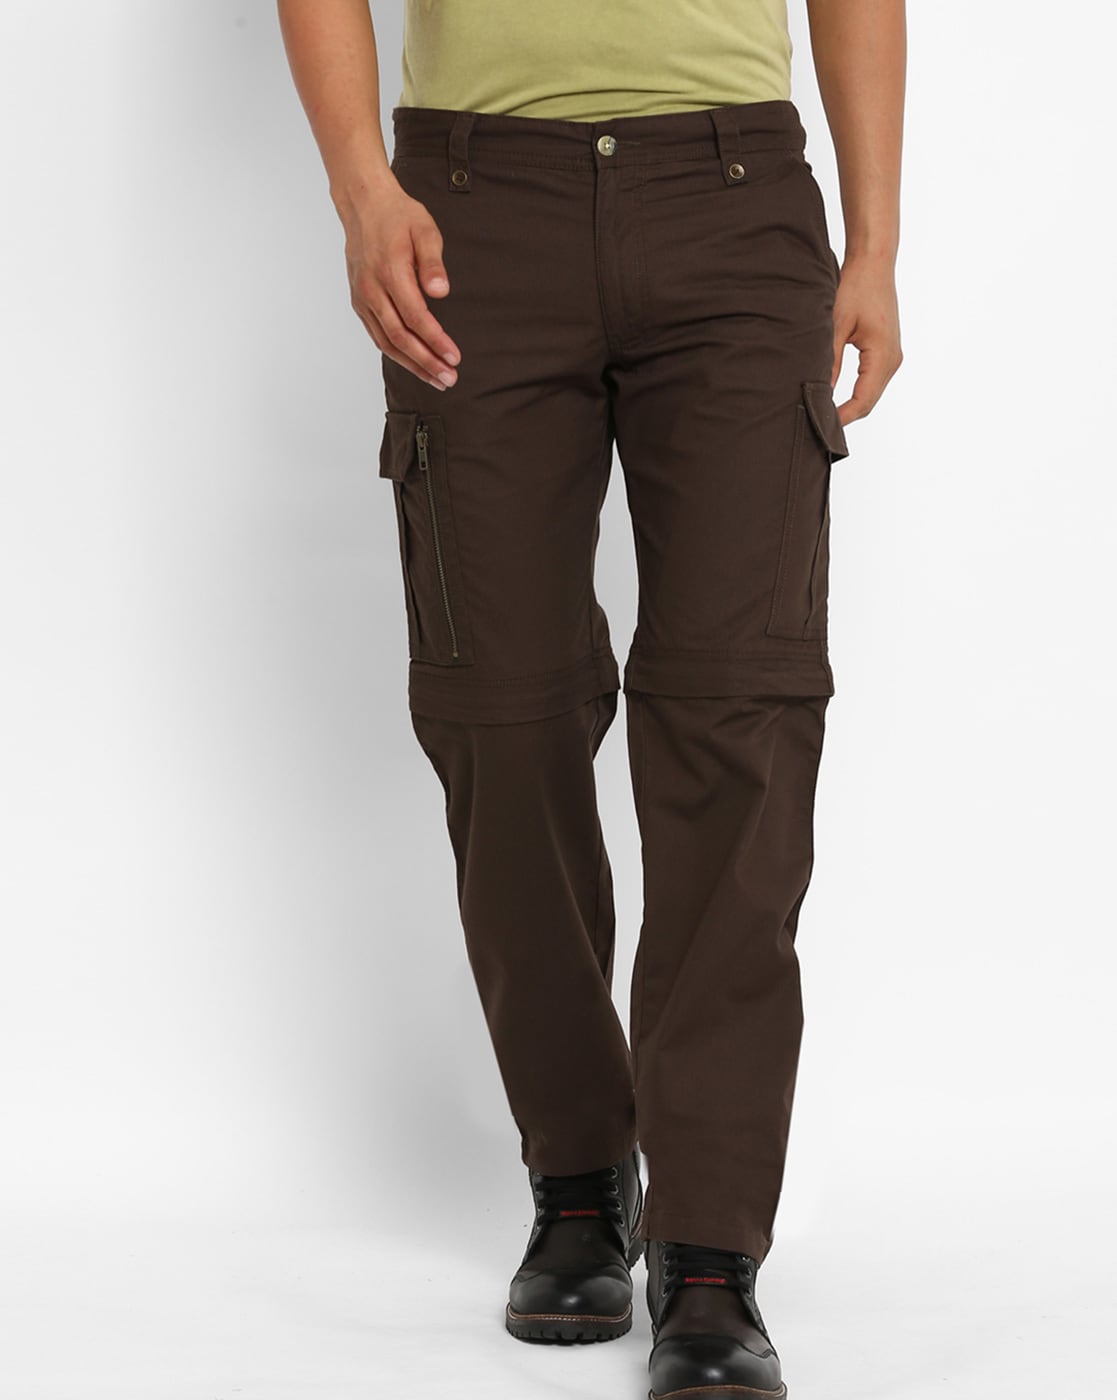 Royal Enfield Convertible Riding Trouser Olive 32